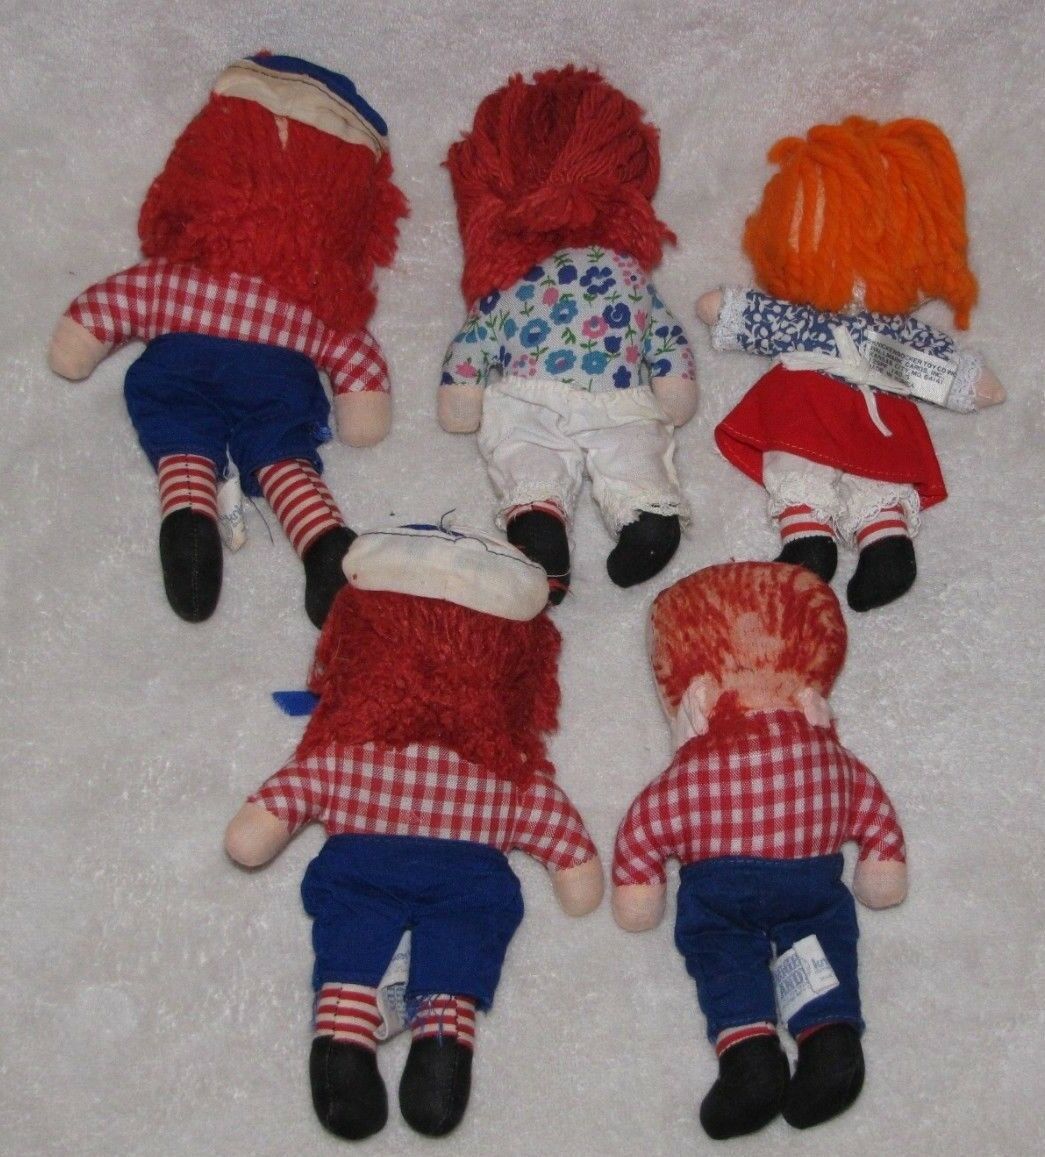 Details about   RARE Vintage Knickerbocker Raggedy Ann And Andy Cloth Dolls 12 Inch Original 